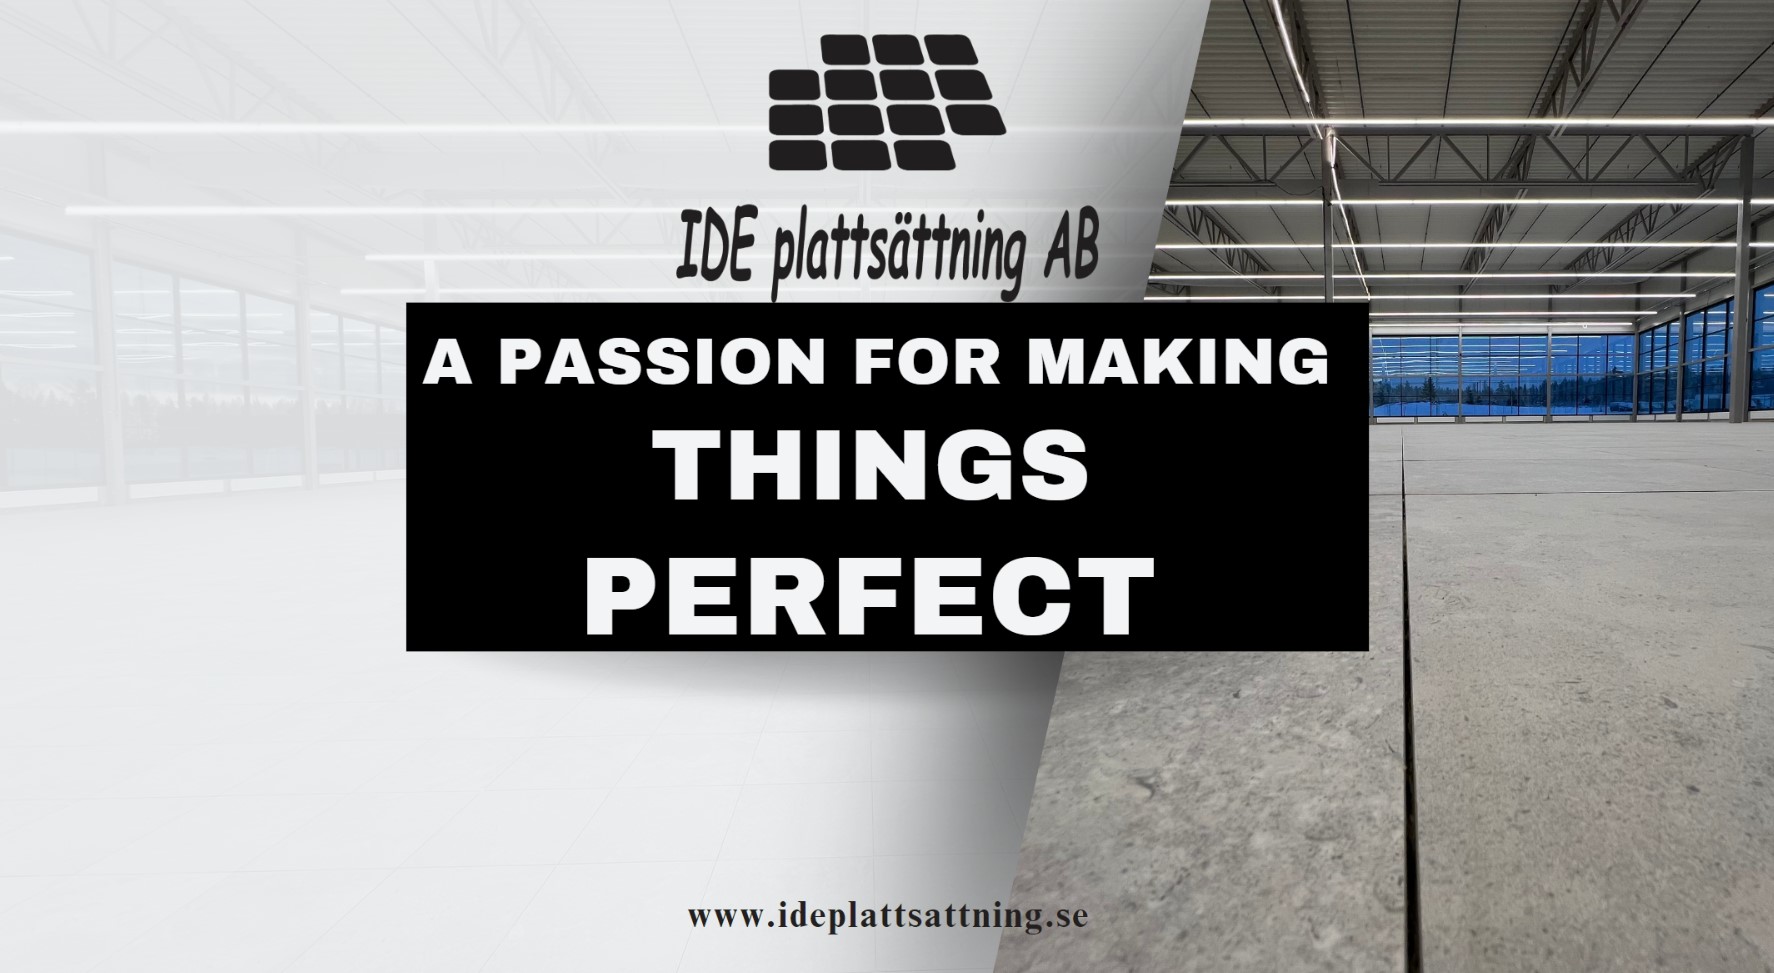 A passion for making things perfect